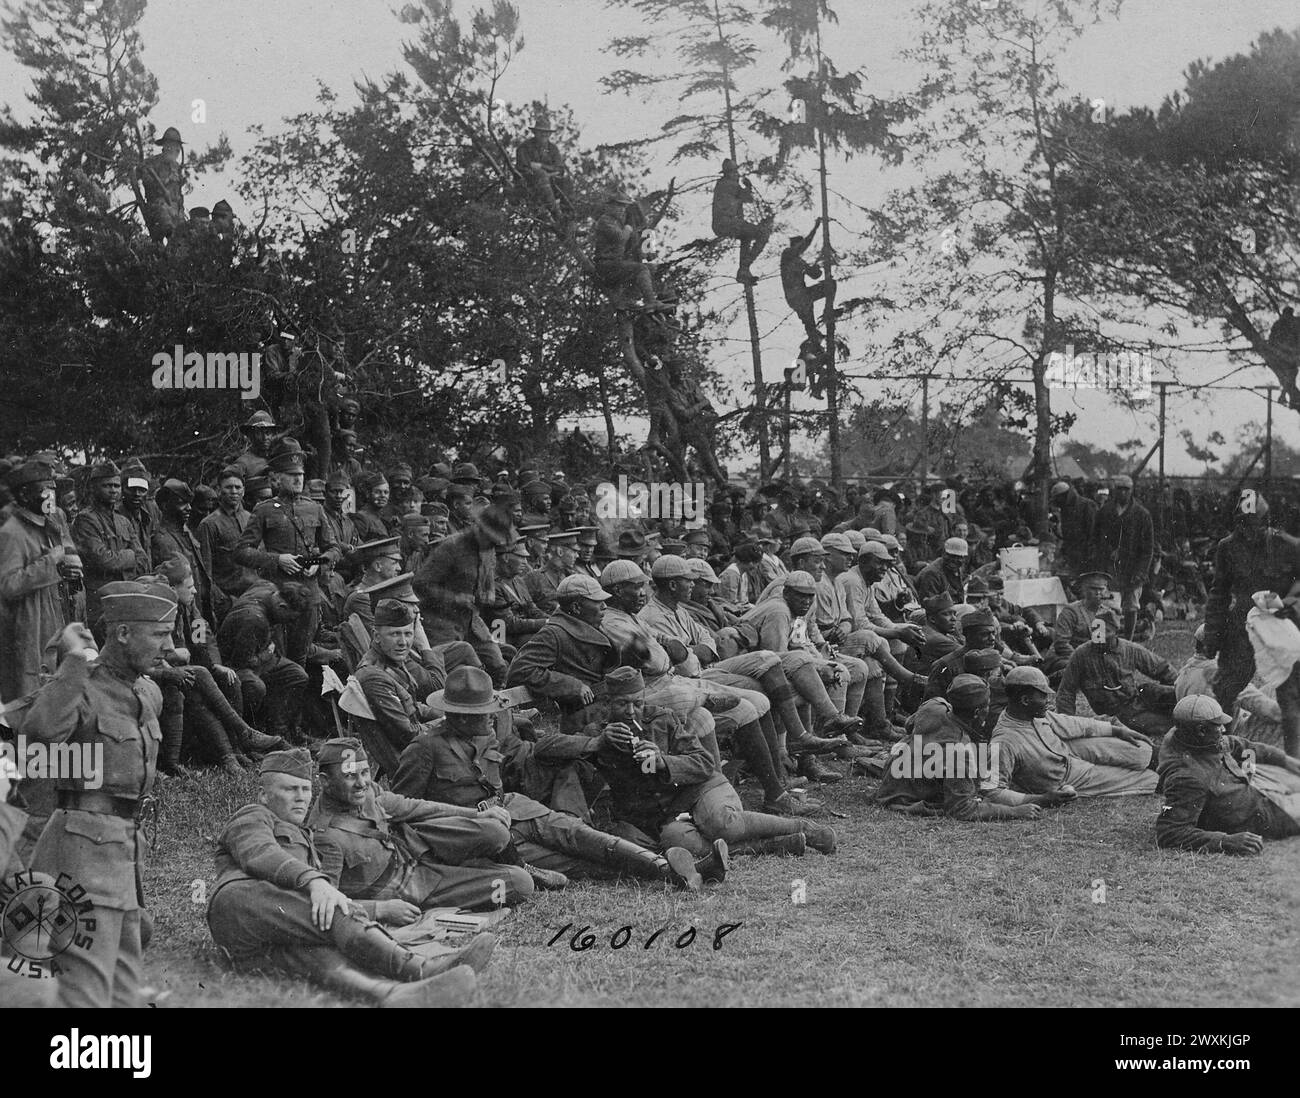 Crowd watches league champion baseball game, one team made up of African-American soldiers in the foreground; Savenay, Loire Inferieure, France ca. 1919 Stock Photo